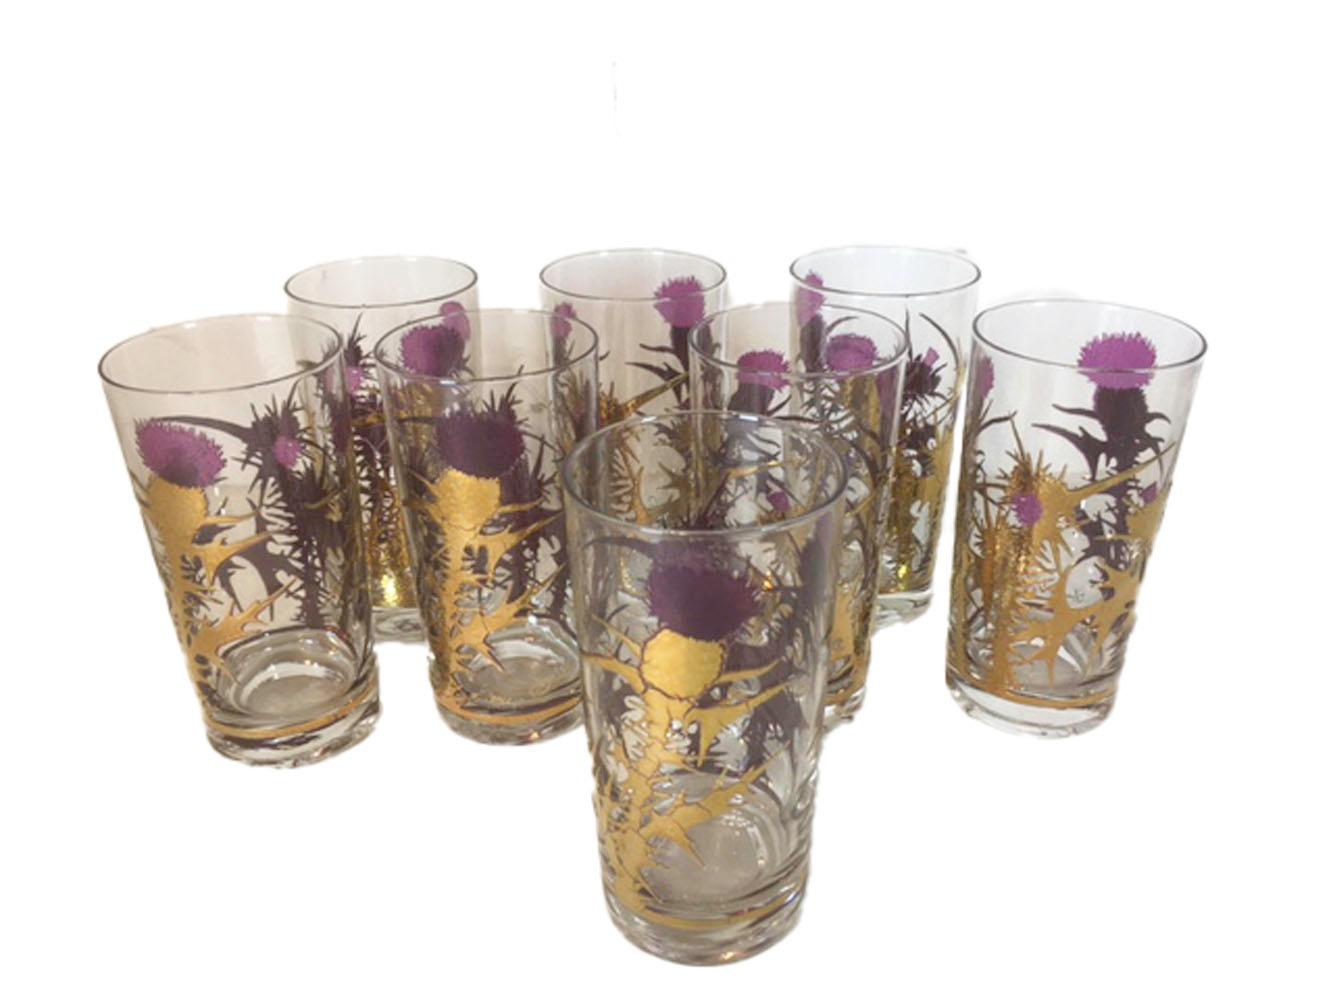 Nineteen piece vintage barware set designed by Gregory Duncan for West Virginia Glass and bearing his signature. Each piece decorated with thistle plants in raised translucent purple enamel on clear glass then covered in burnished 22-karat gold,